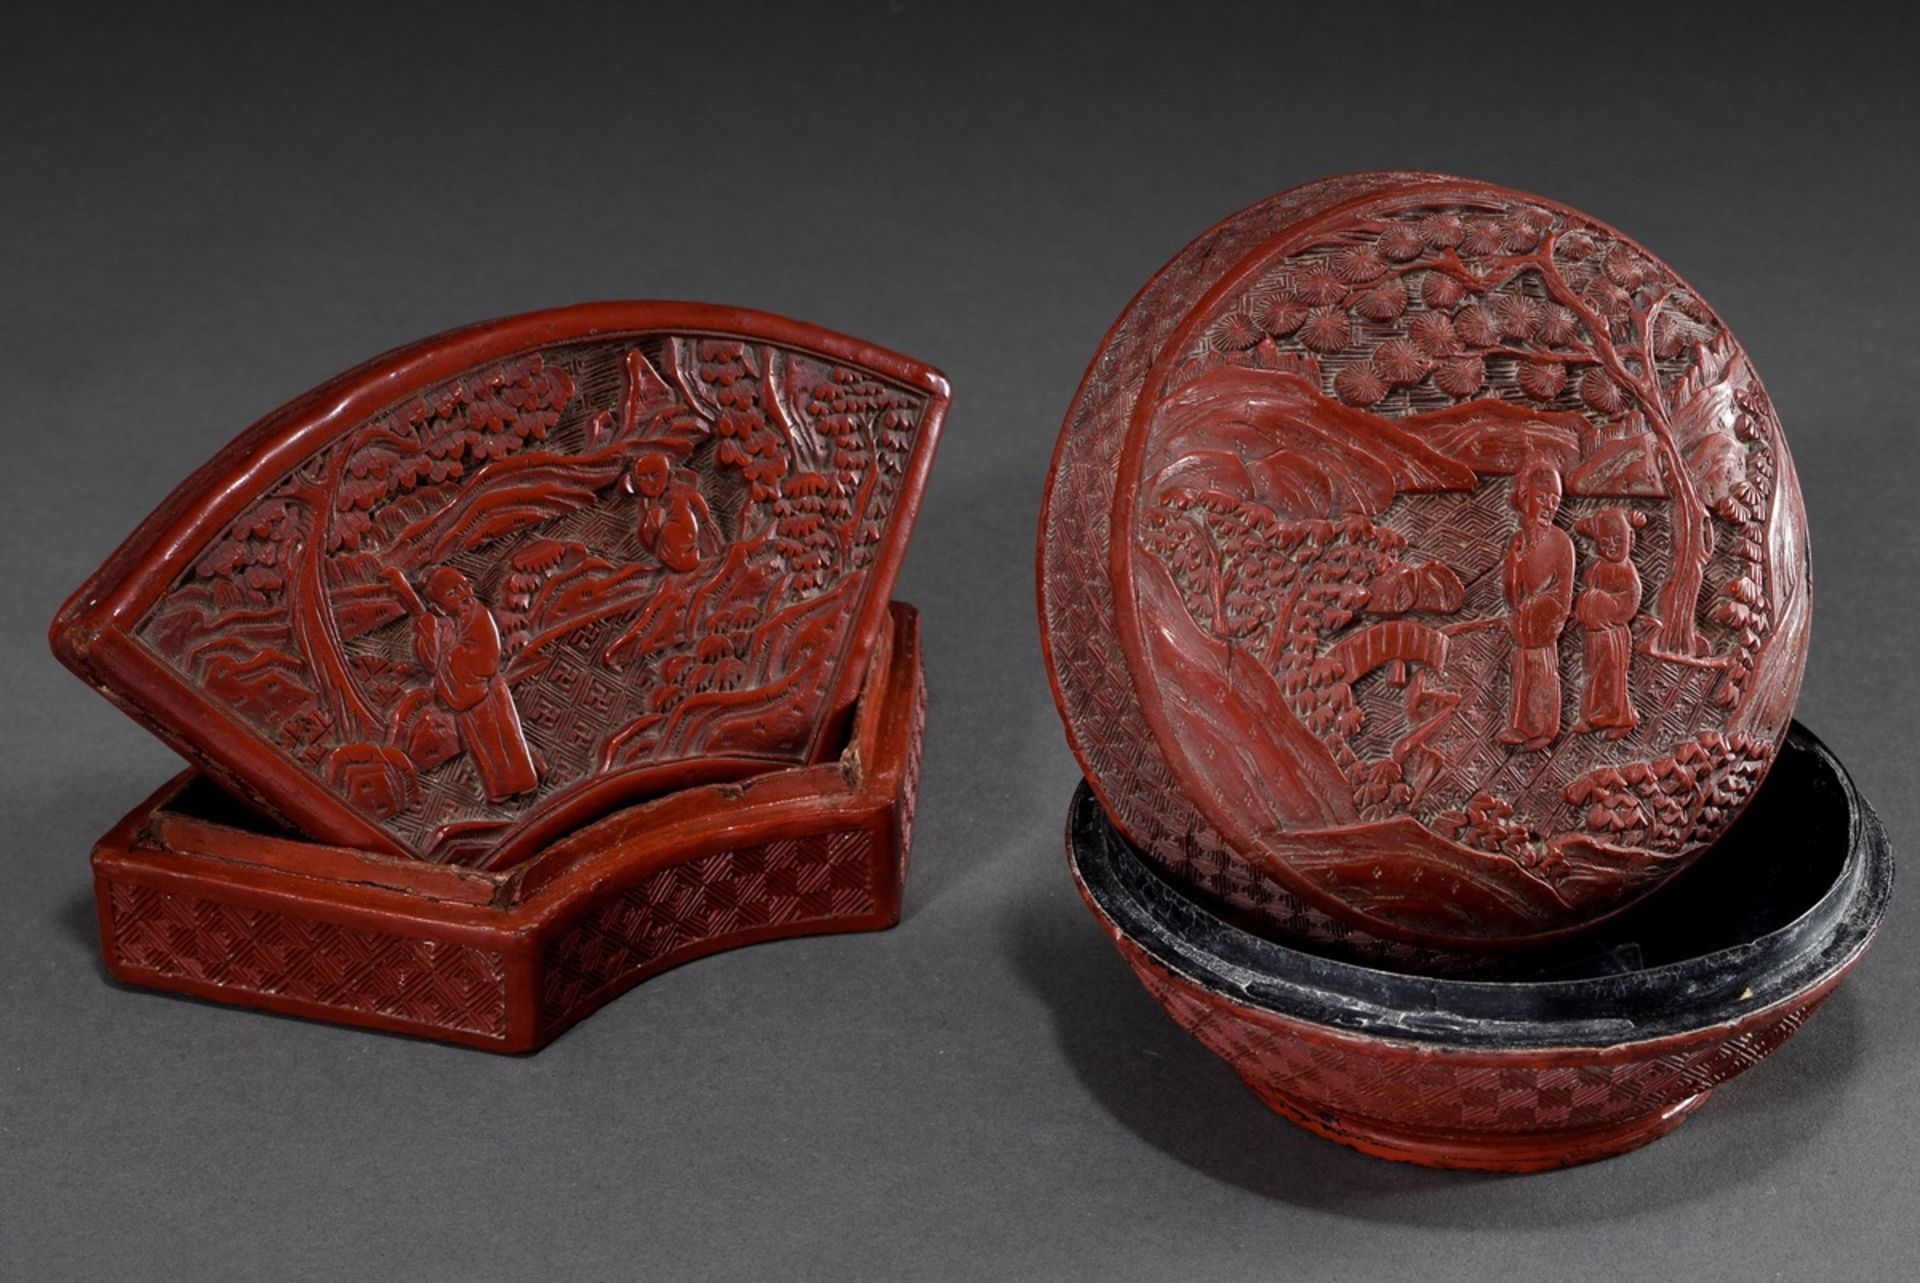 2 Various round and fan-shaped boxes "Garden Scenes" in carved lacquer Art, China c. 1900, h. 7cm, 